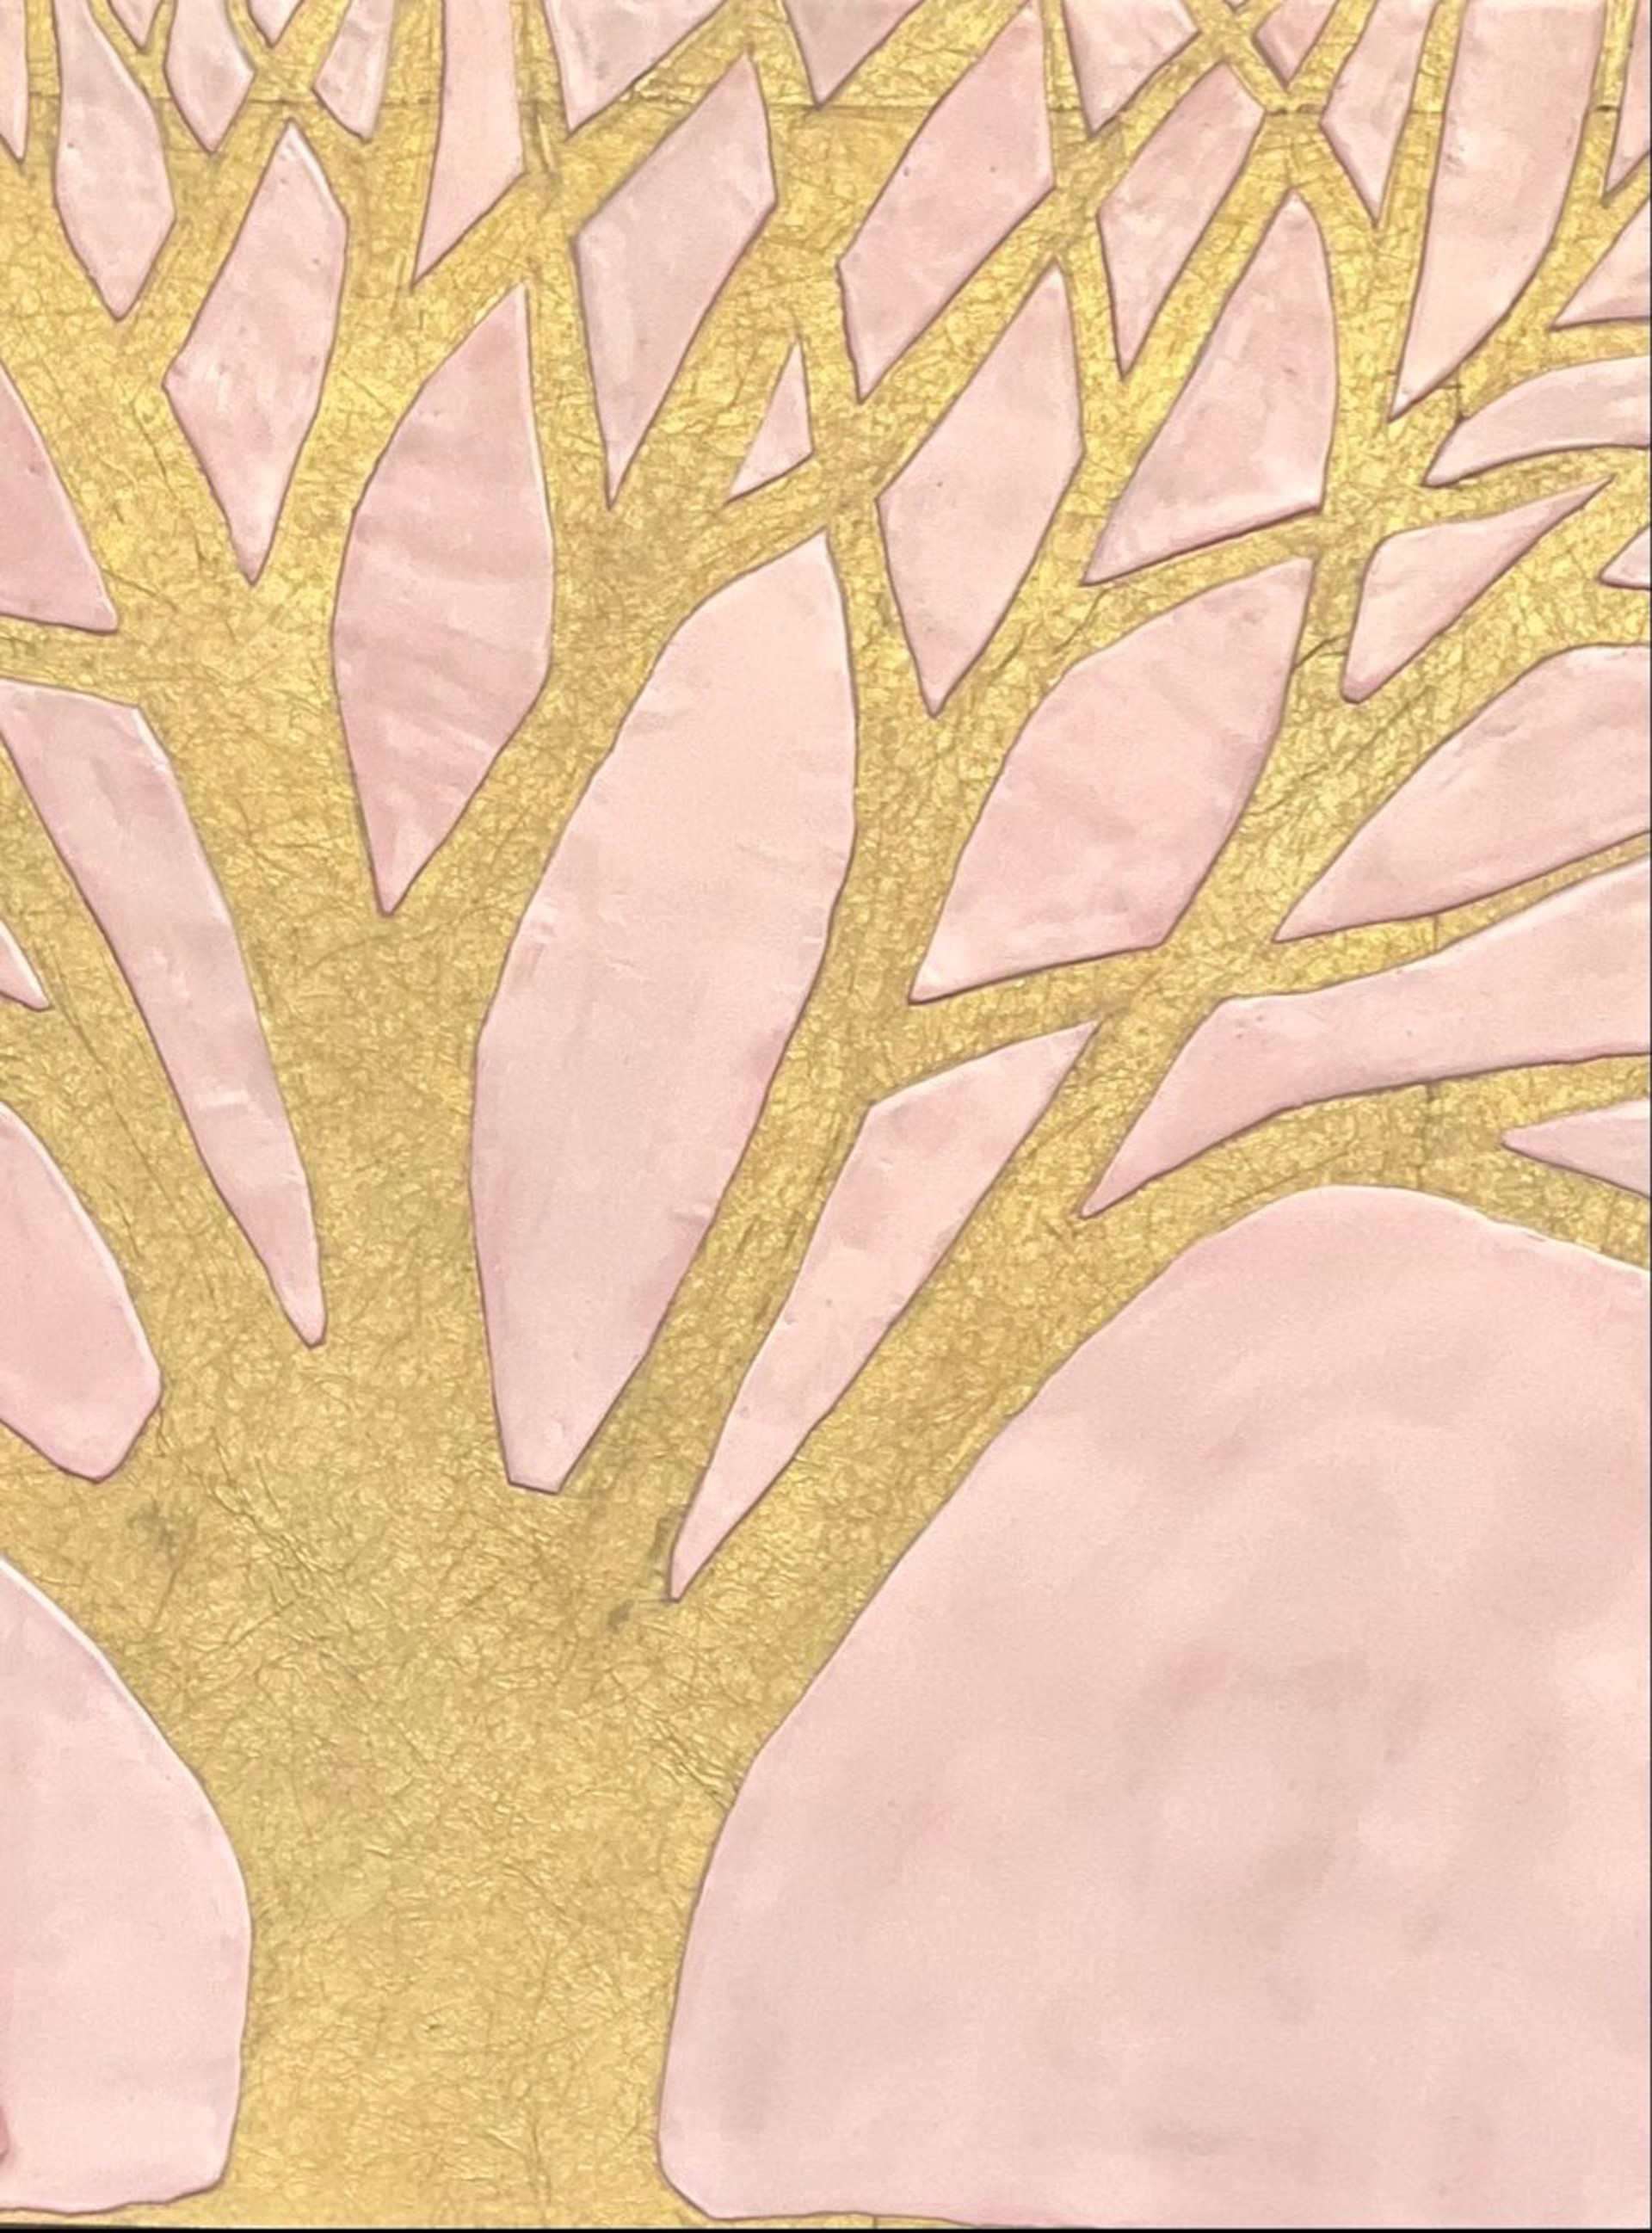 Mystic Tree (Pink and Gold) by Suzanne Damrich